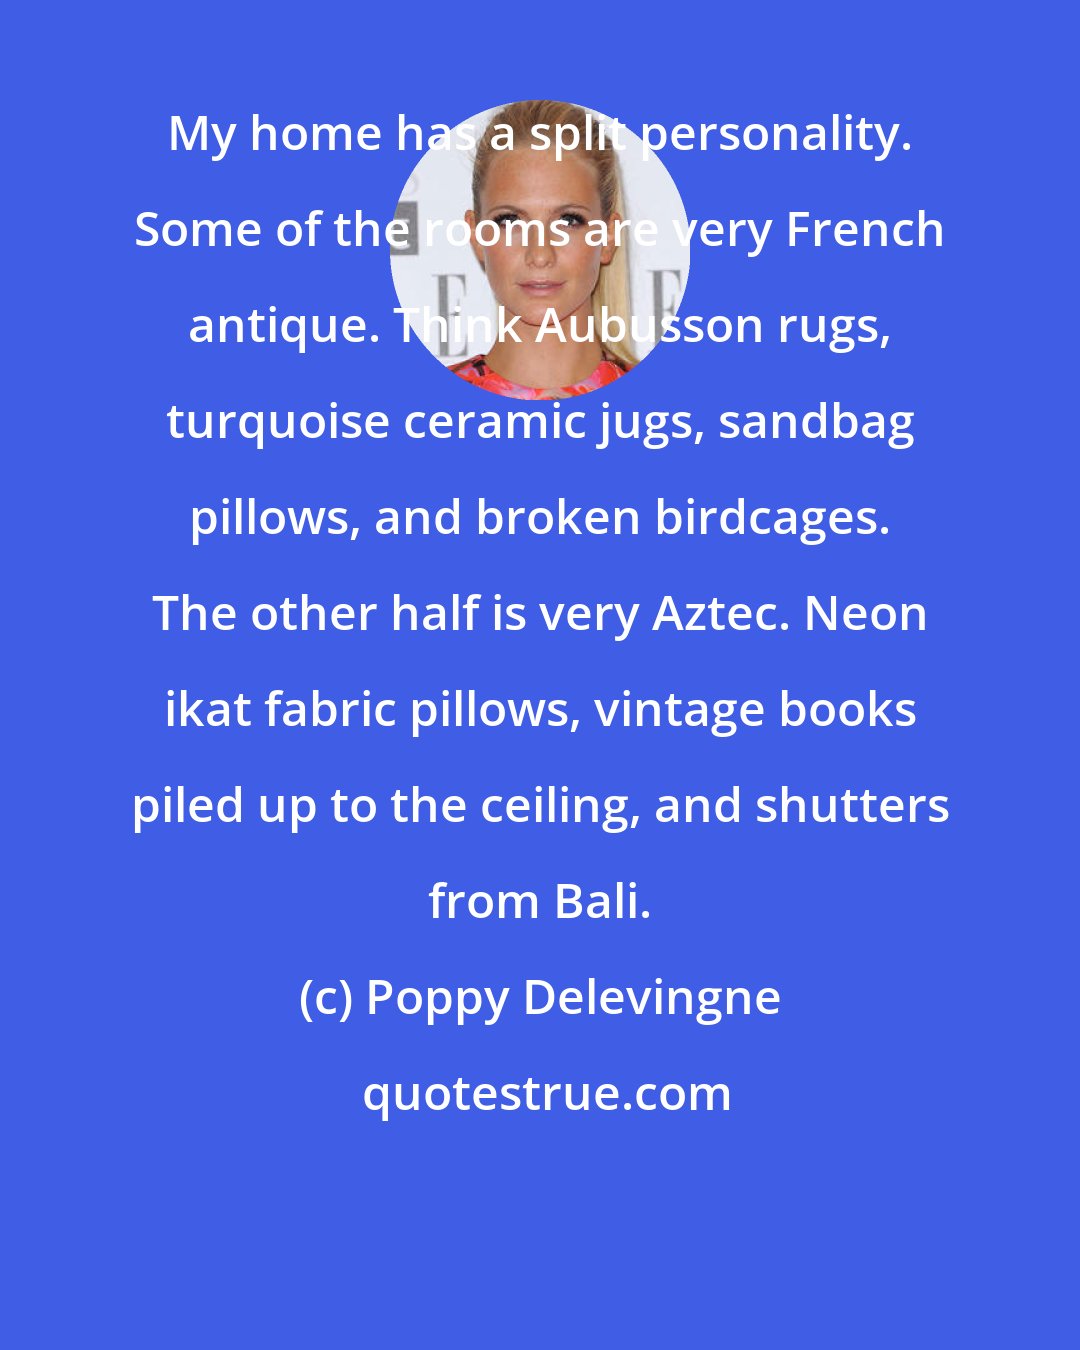 Poppy Delevingne: My home has a split personality. Some of the rooms are very French antique. Think Aubusson rugs, turquoise ceramic jugs, sandbag pillows, and broken birdcages. The other half is very Aztec. Neon ikat fabric pillows, vintage books piled up to the ceiling, and shutters from Bali.